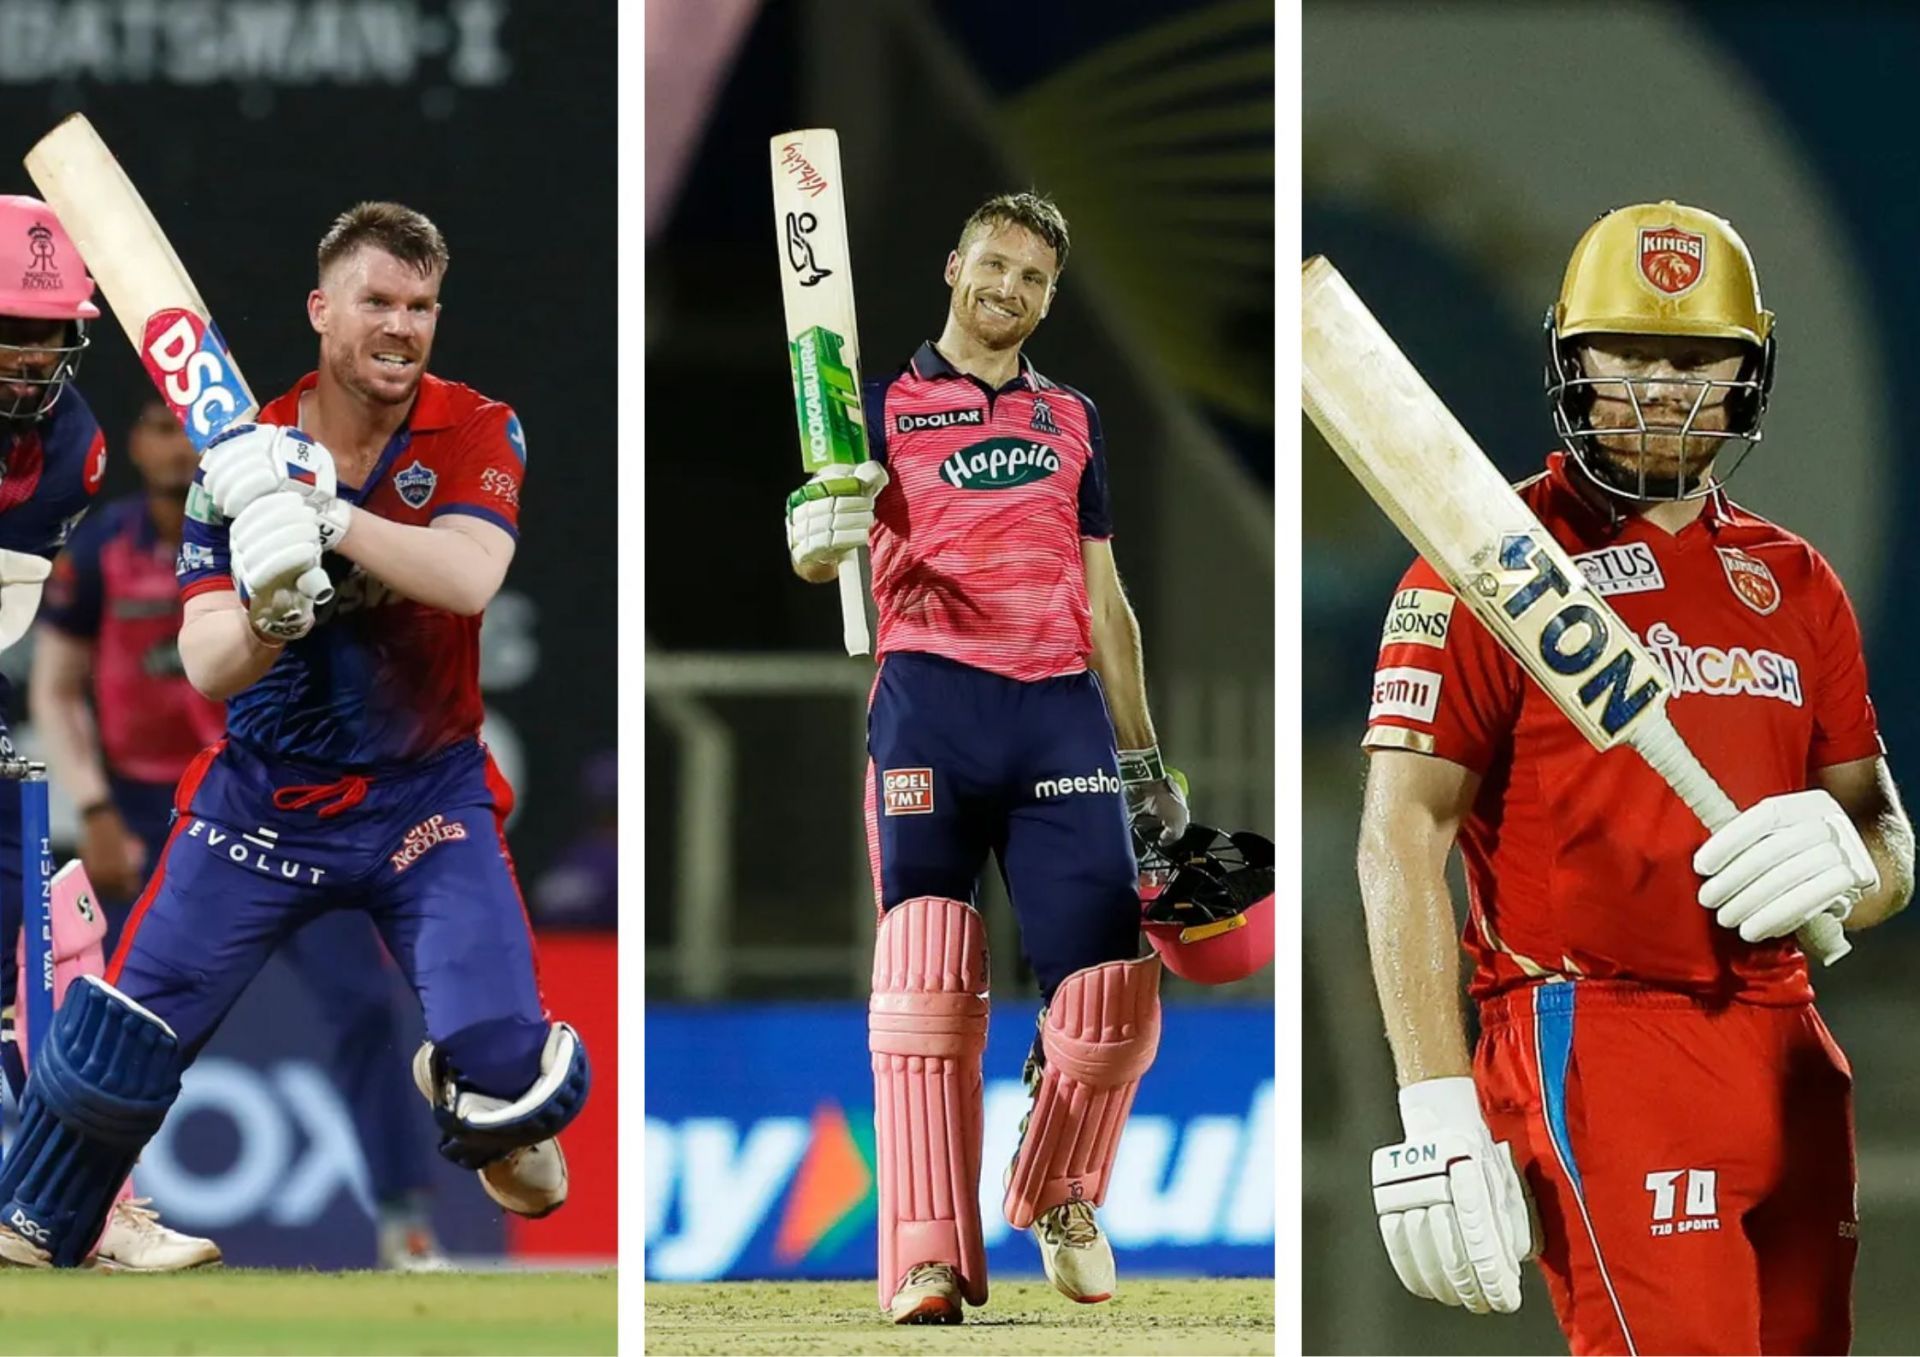 David Warner, Jos Buttler and Jonny Bairstow - destructive, bona fide match-winners in their own right (Picture Credits: IPL).